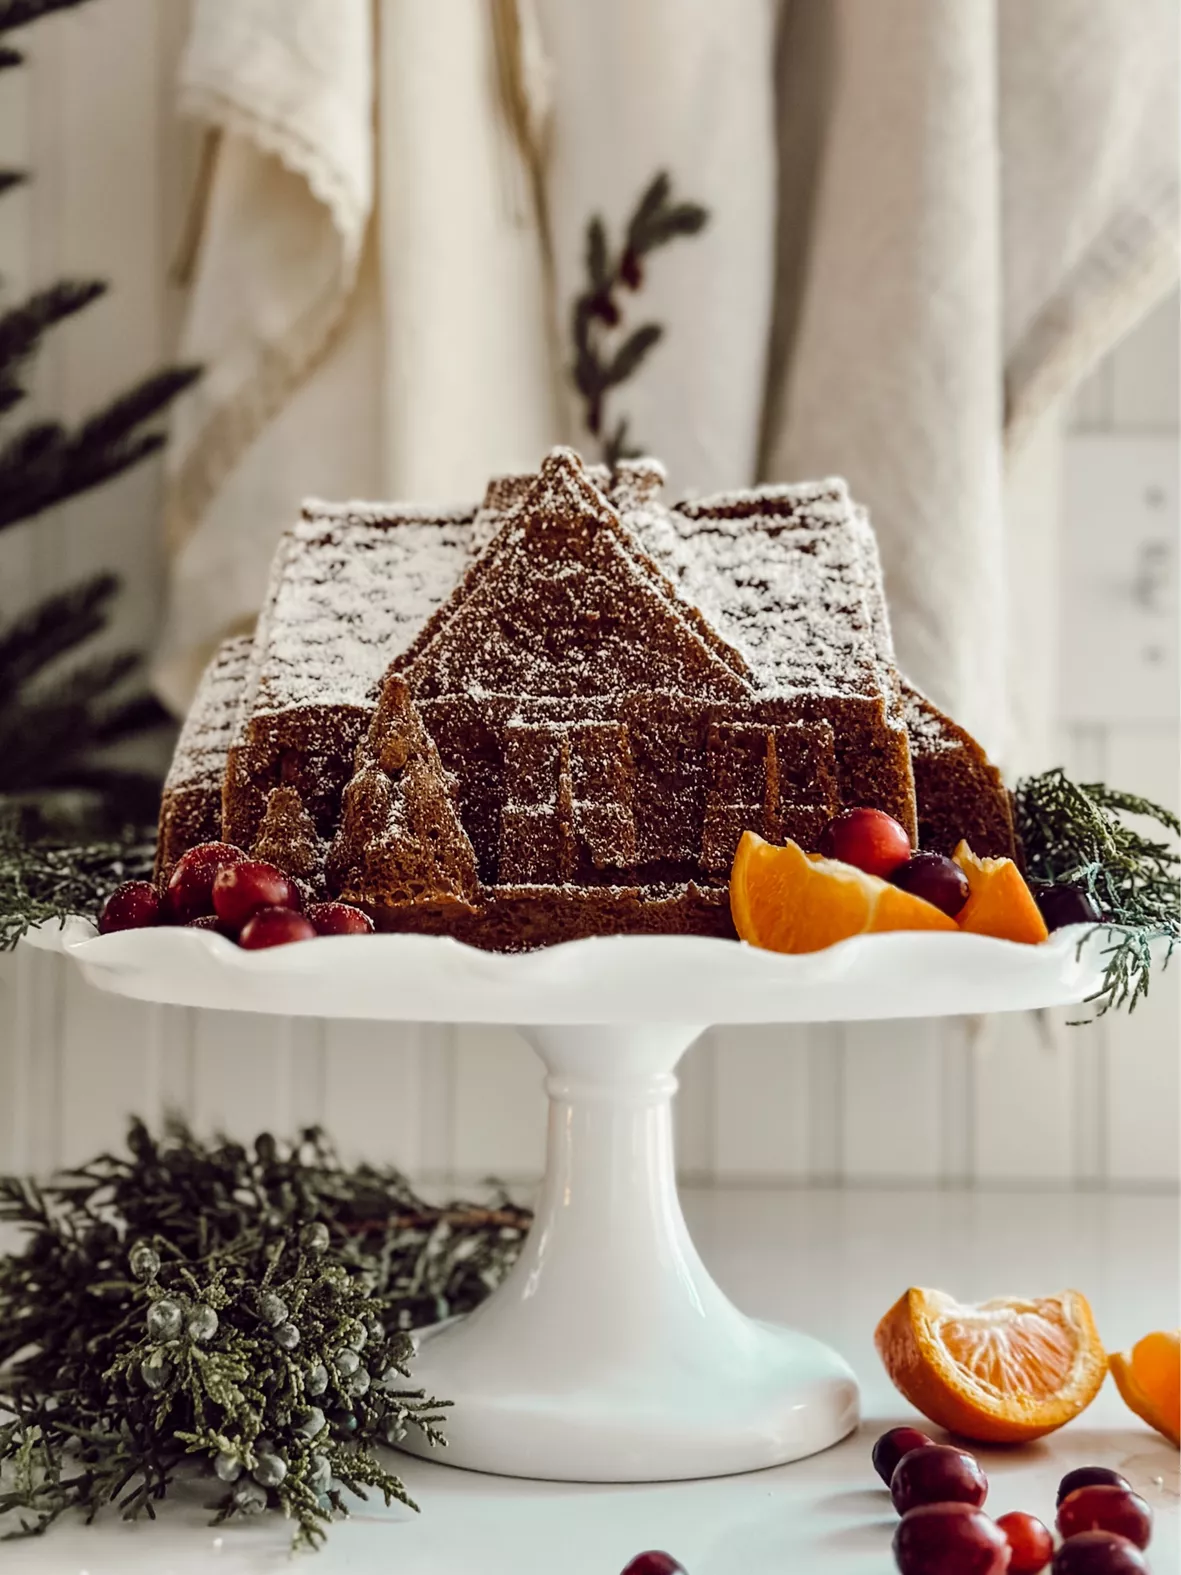 Gingerbread Cake made in a Nordic Ware gingerbread house Bundt pan